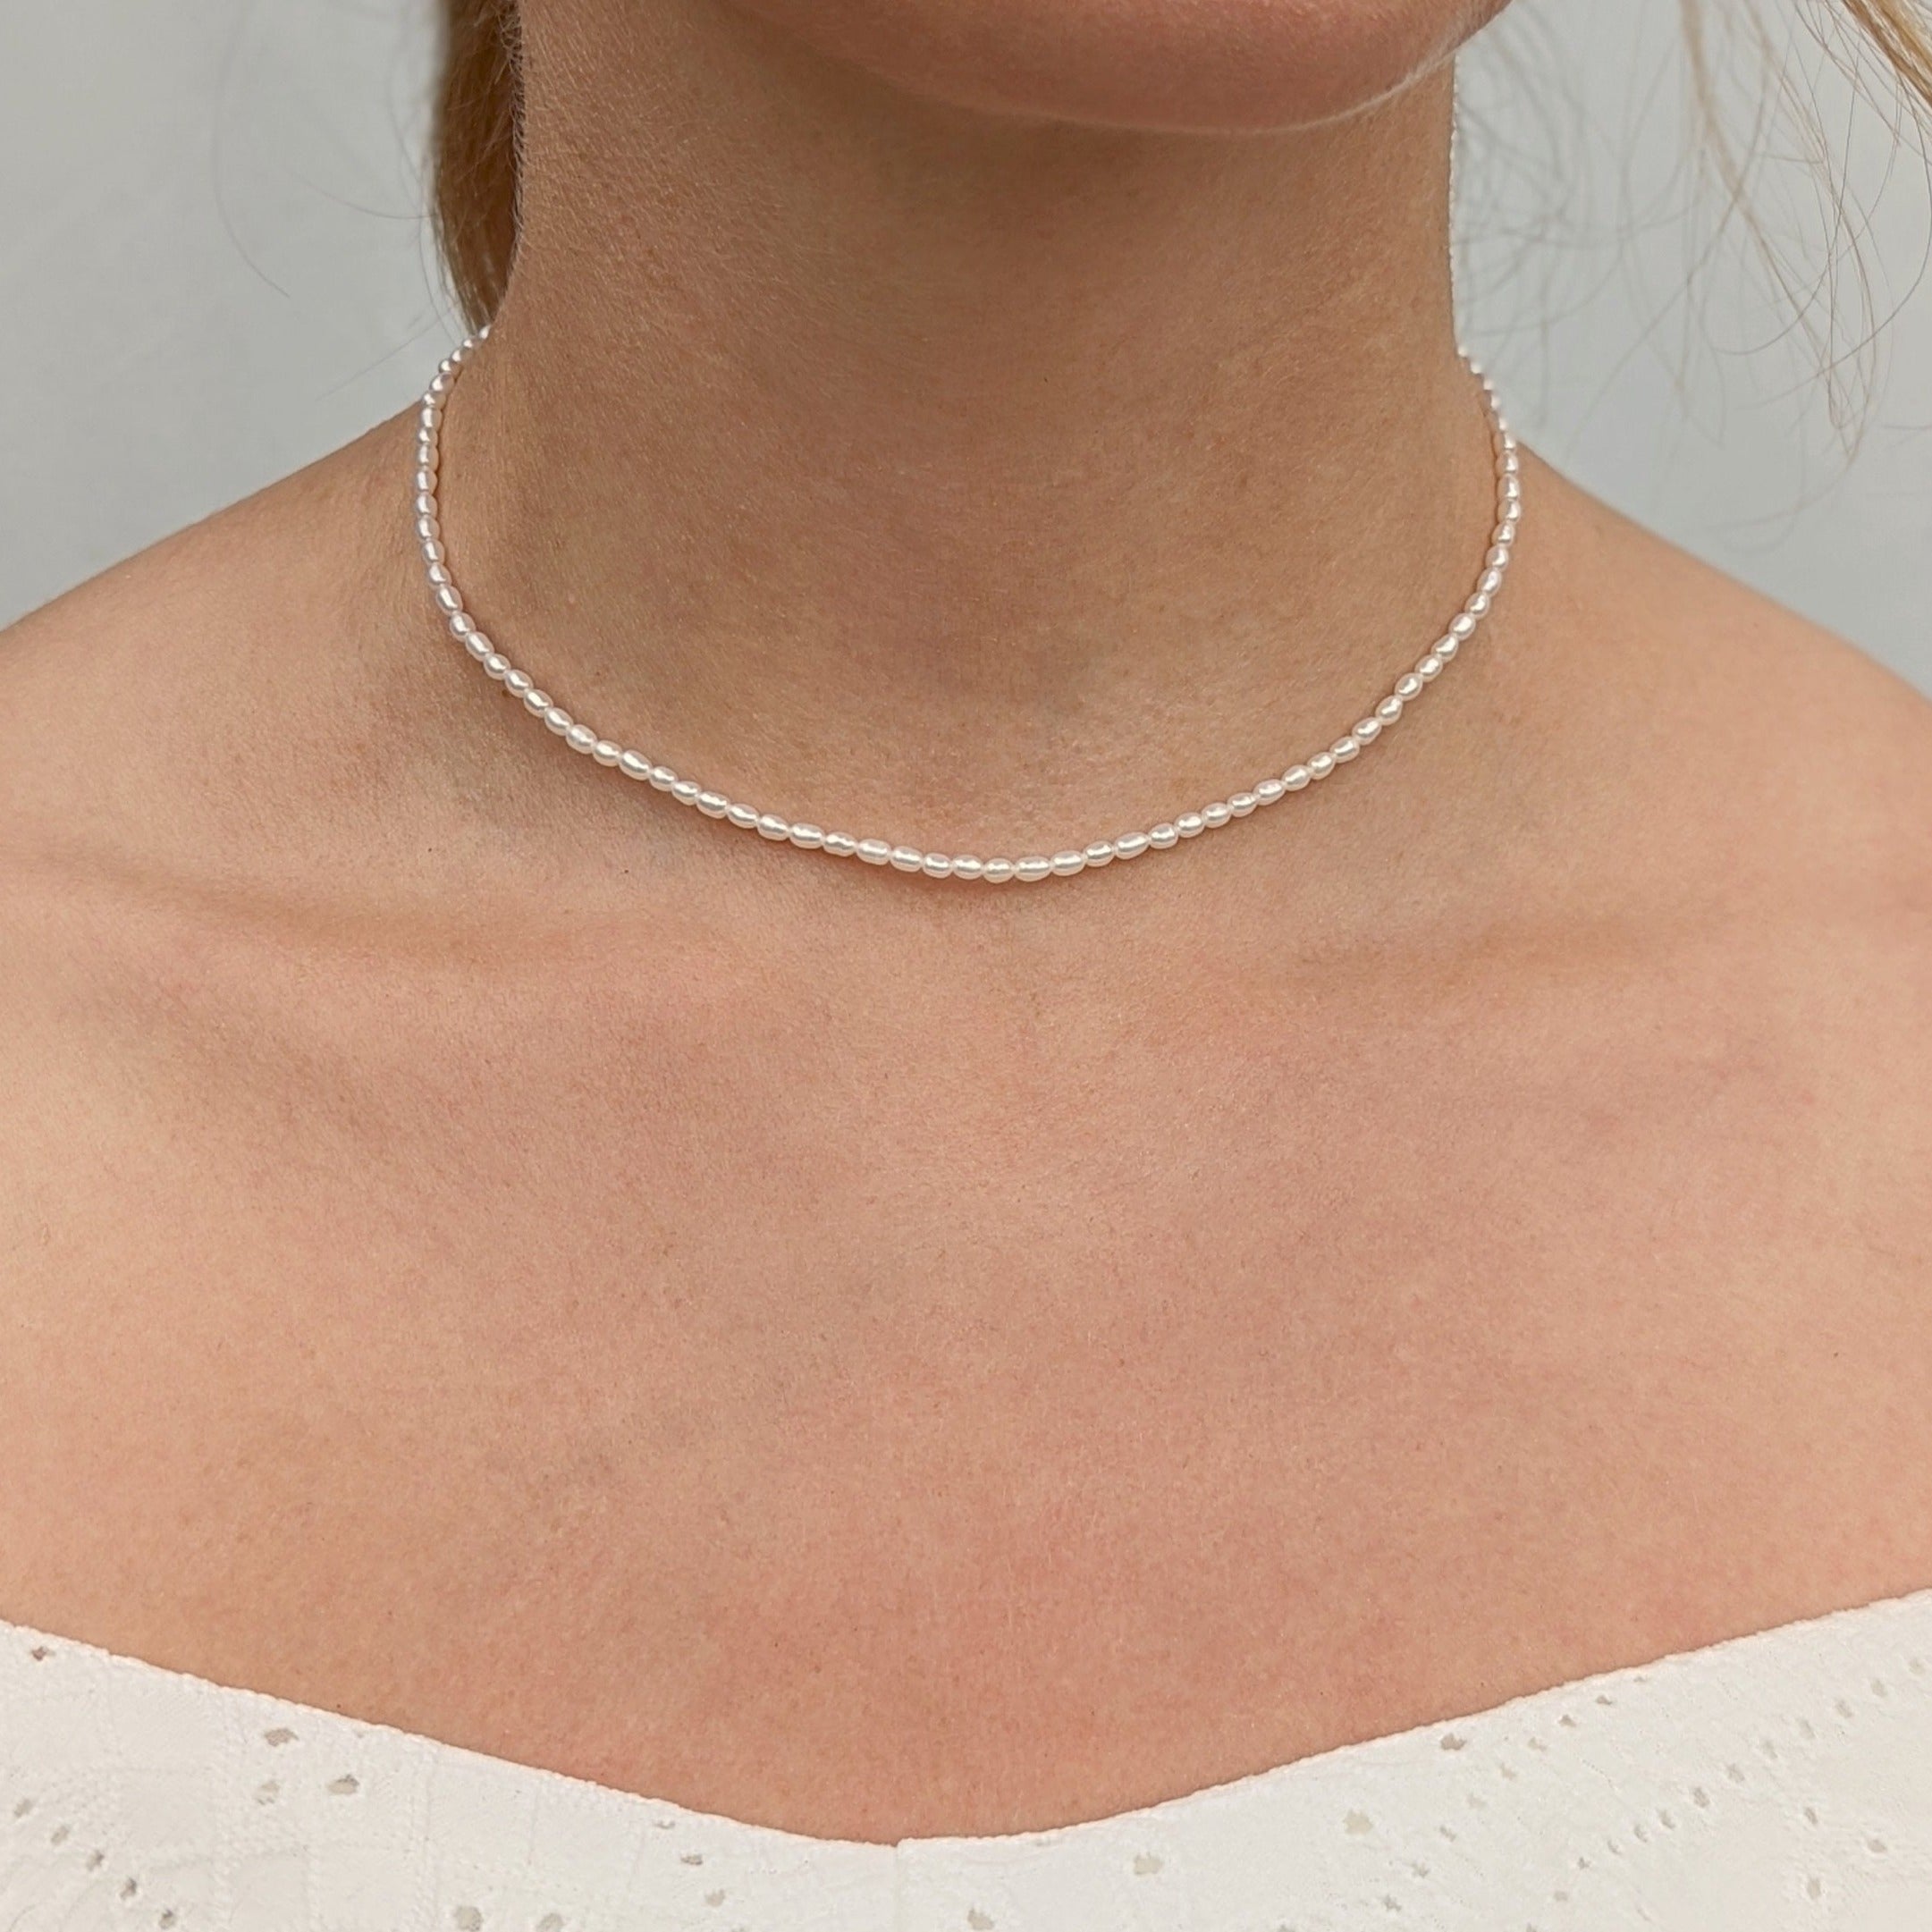 Close up of neck and seed pearl necklace